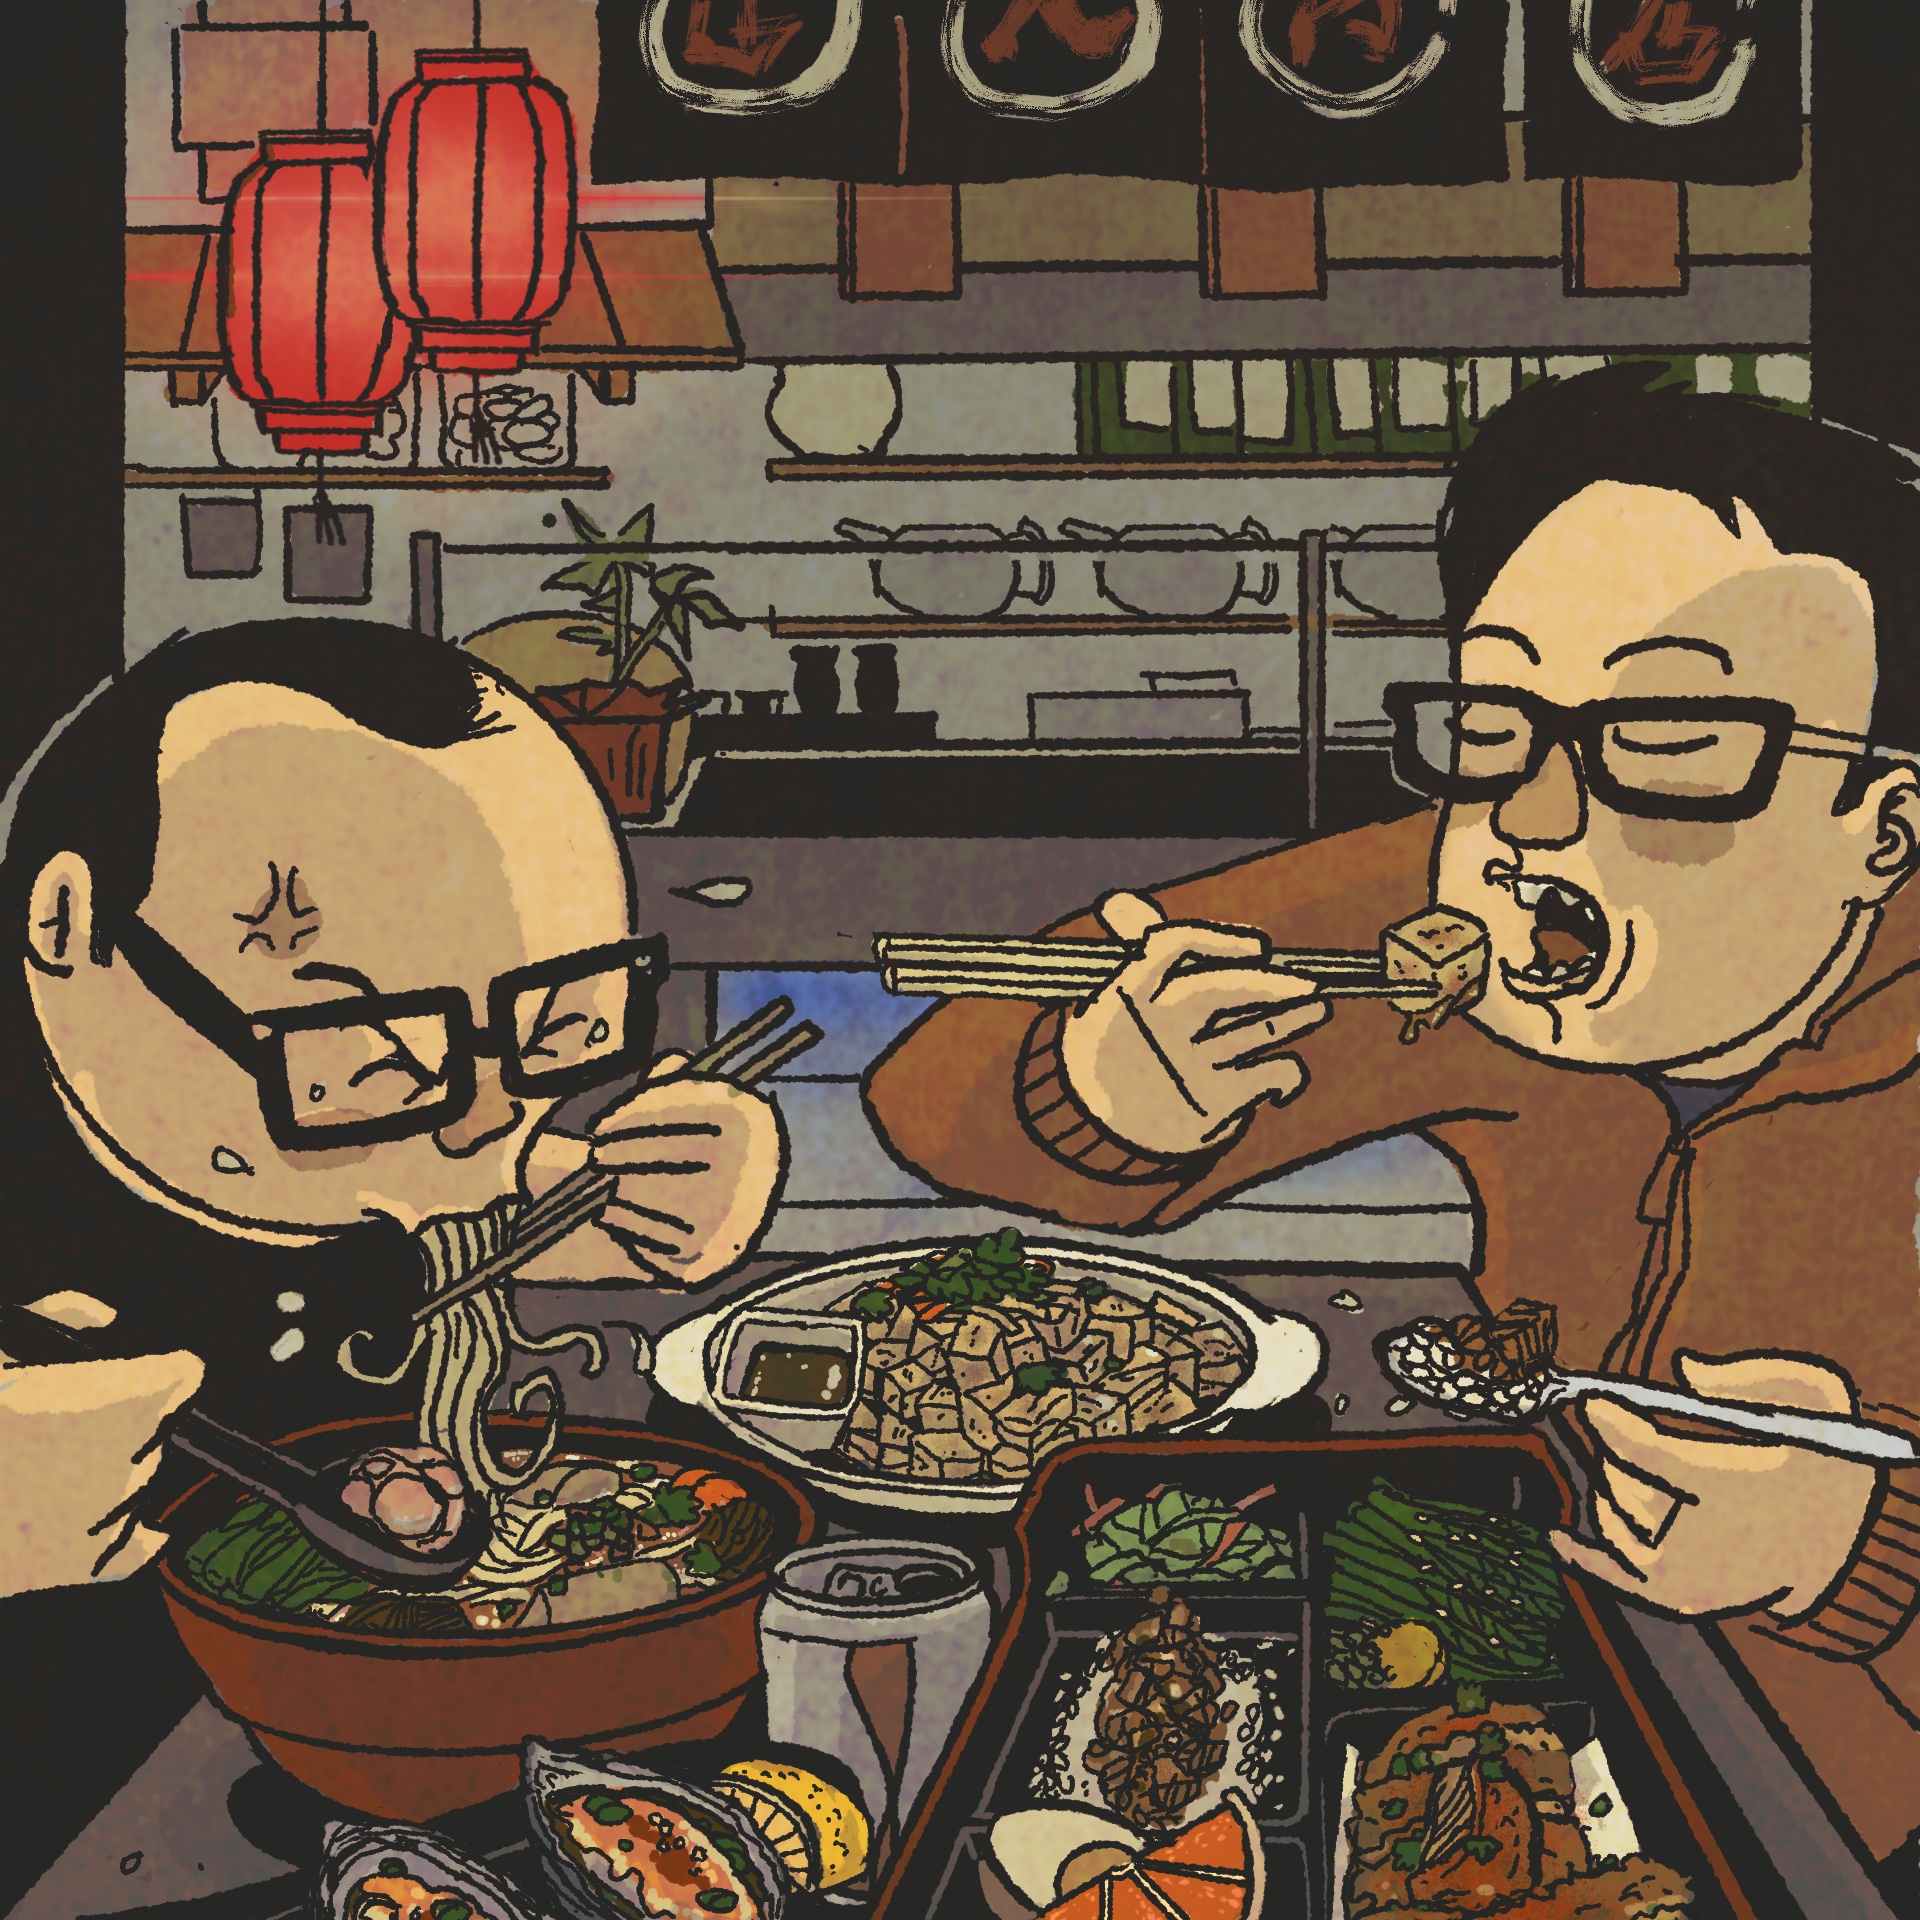 Two men devouring a bowl of soup noodles and a plate of fried tofu, with chopsticks in their hands.